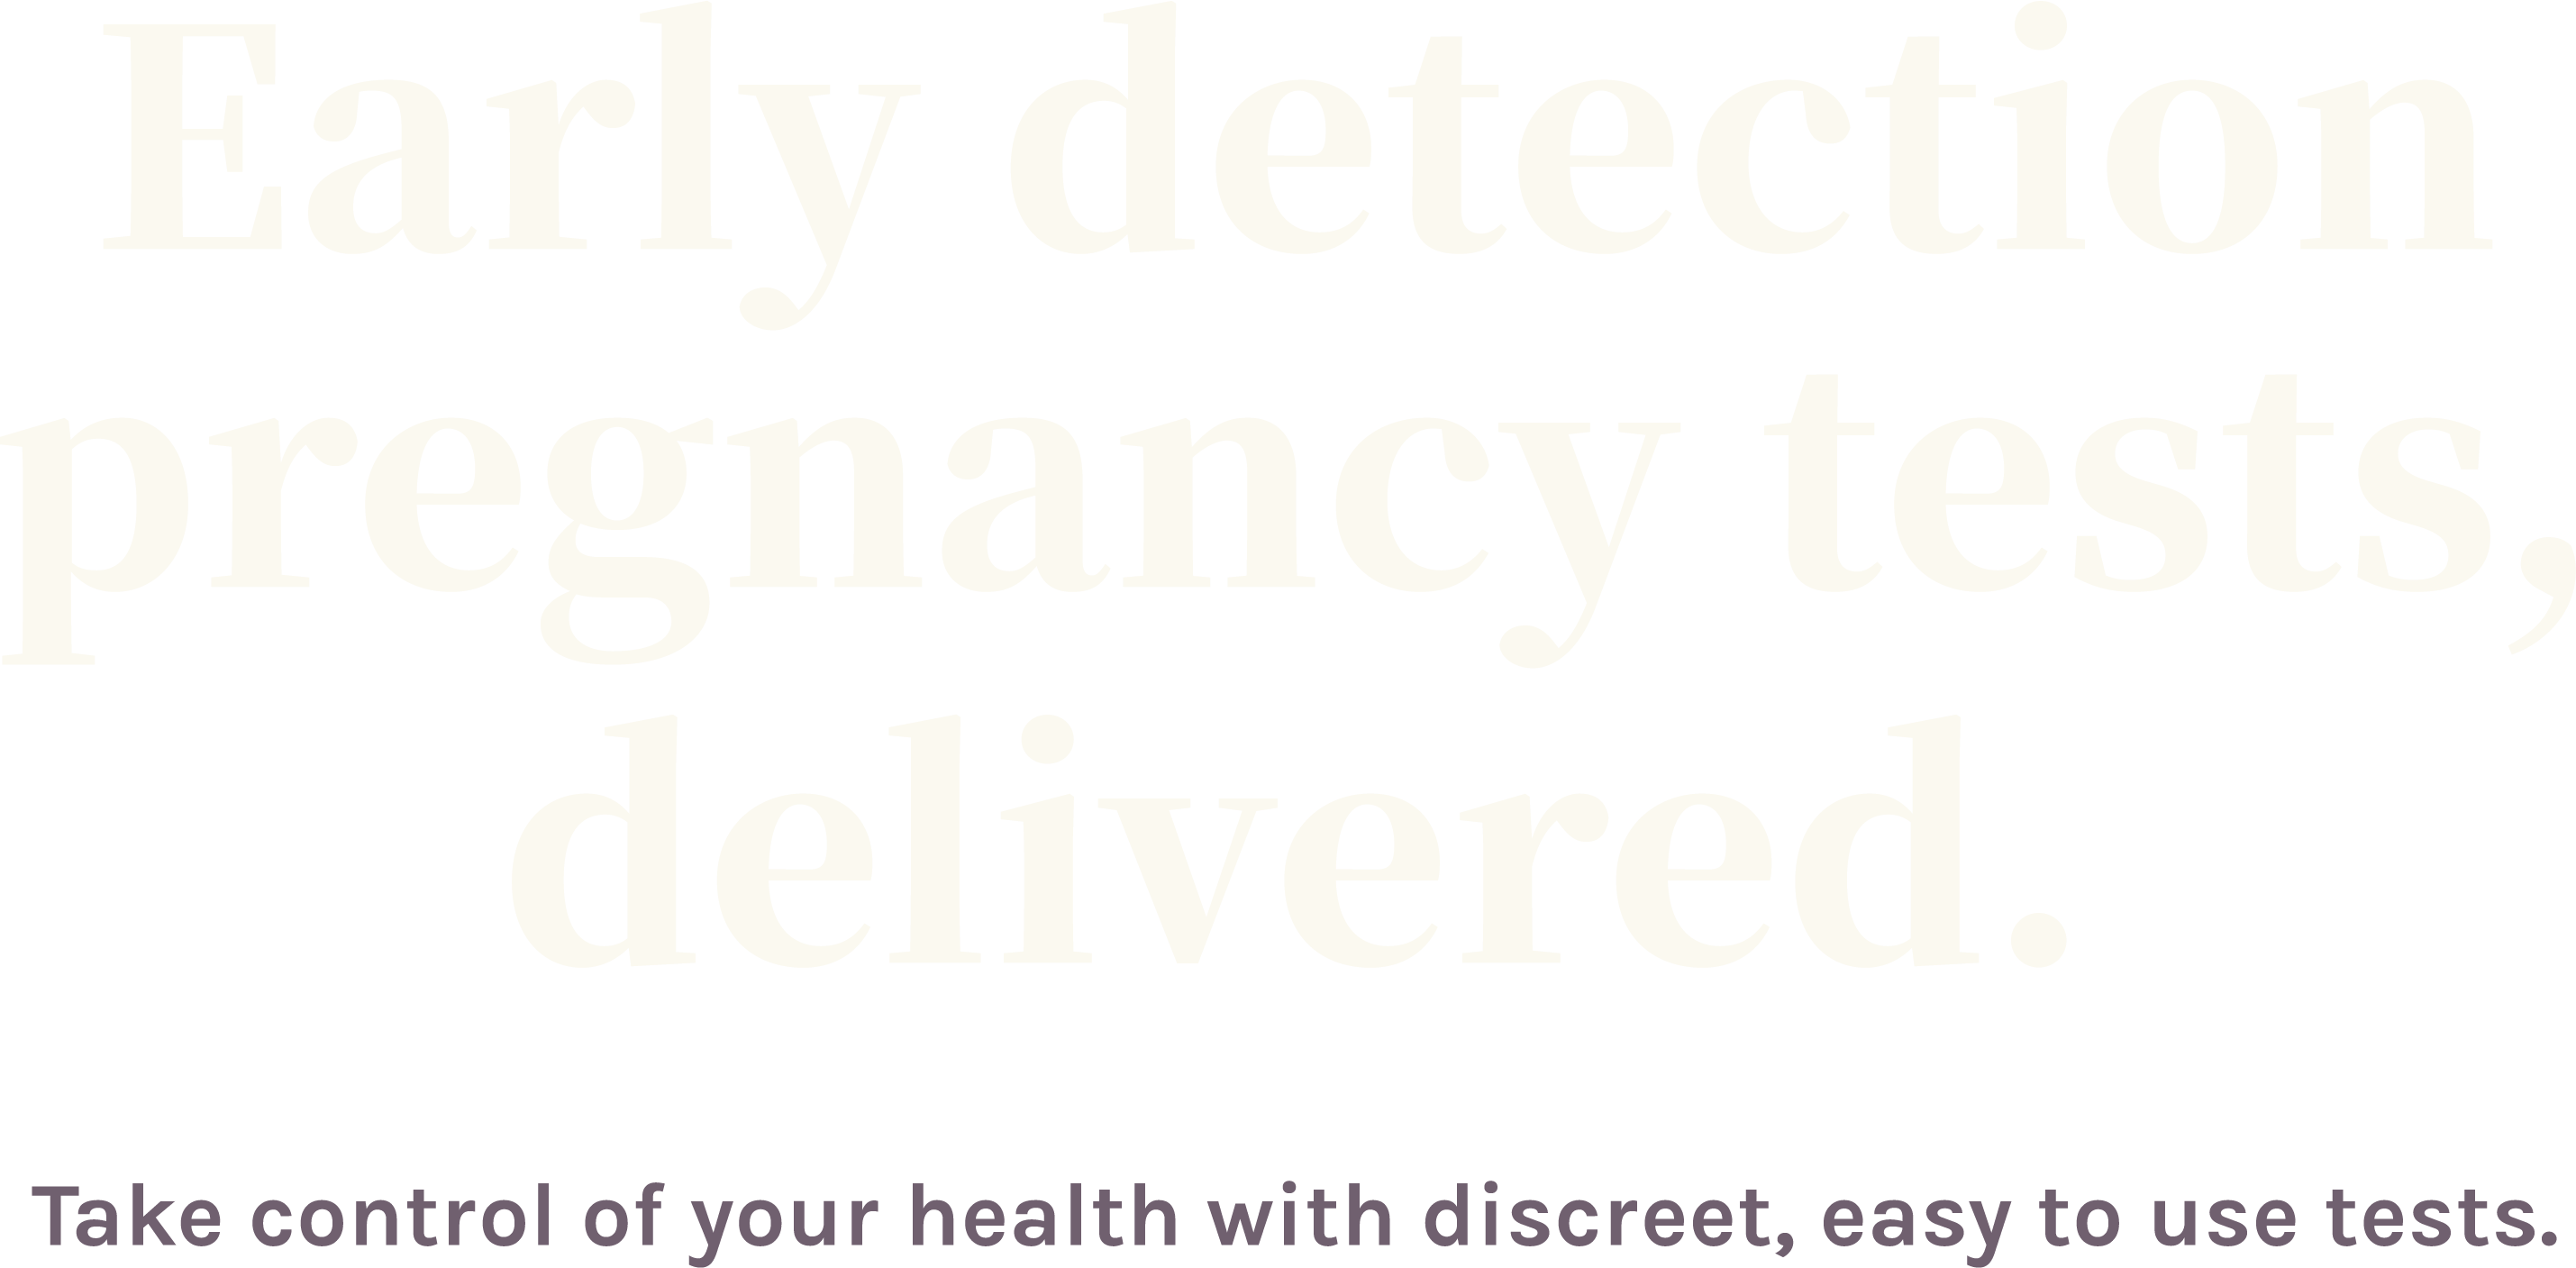 Early detection pregnancy tests, delivered.